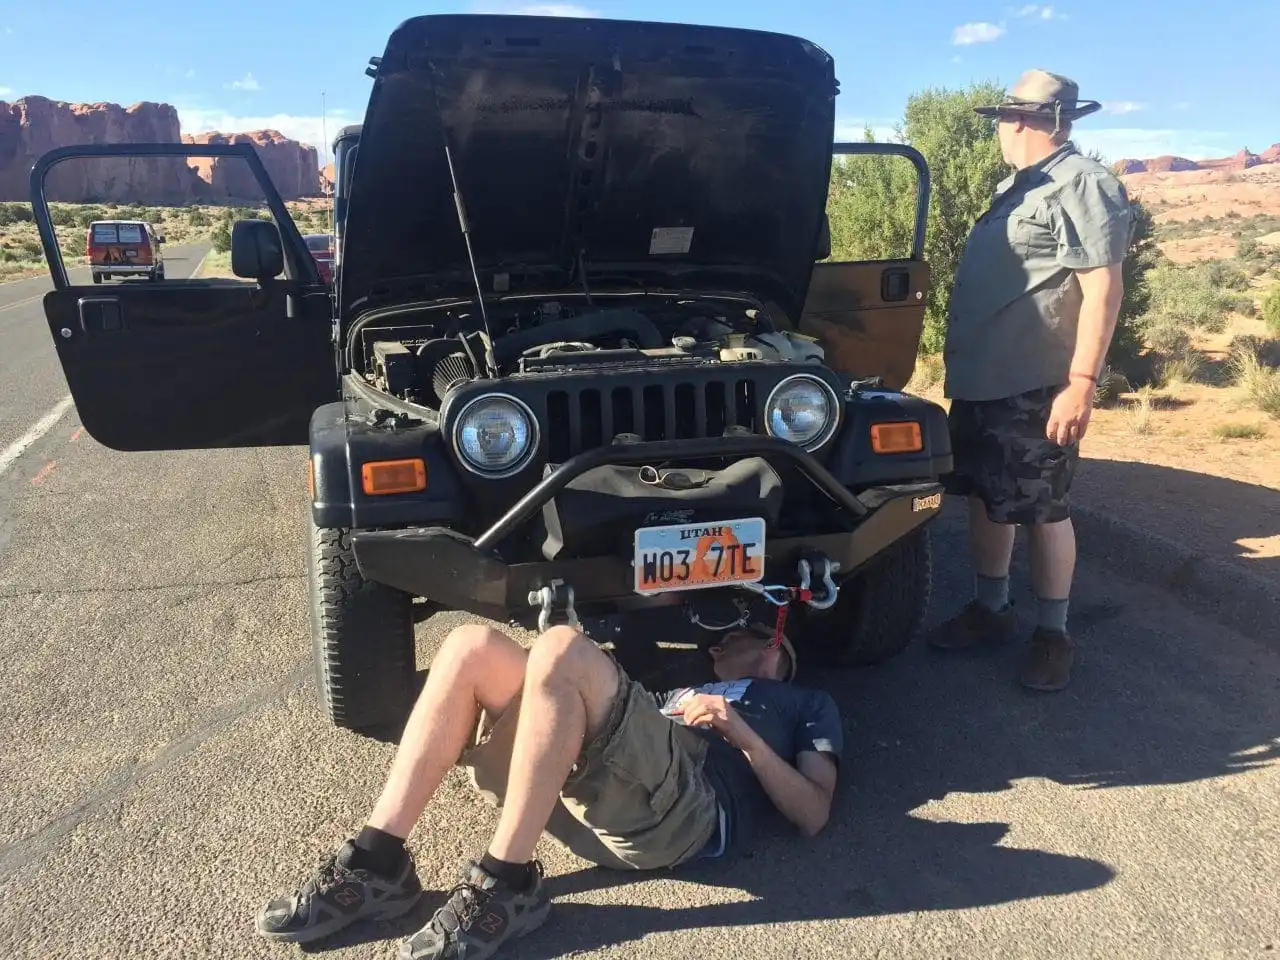 Keith working to repair the transmission line on the Jeep